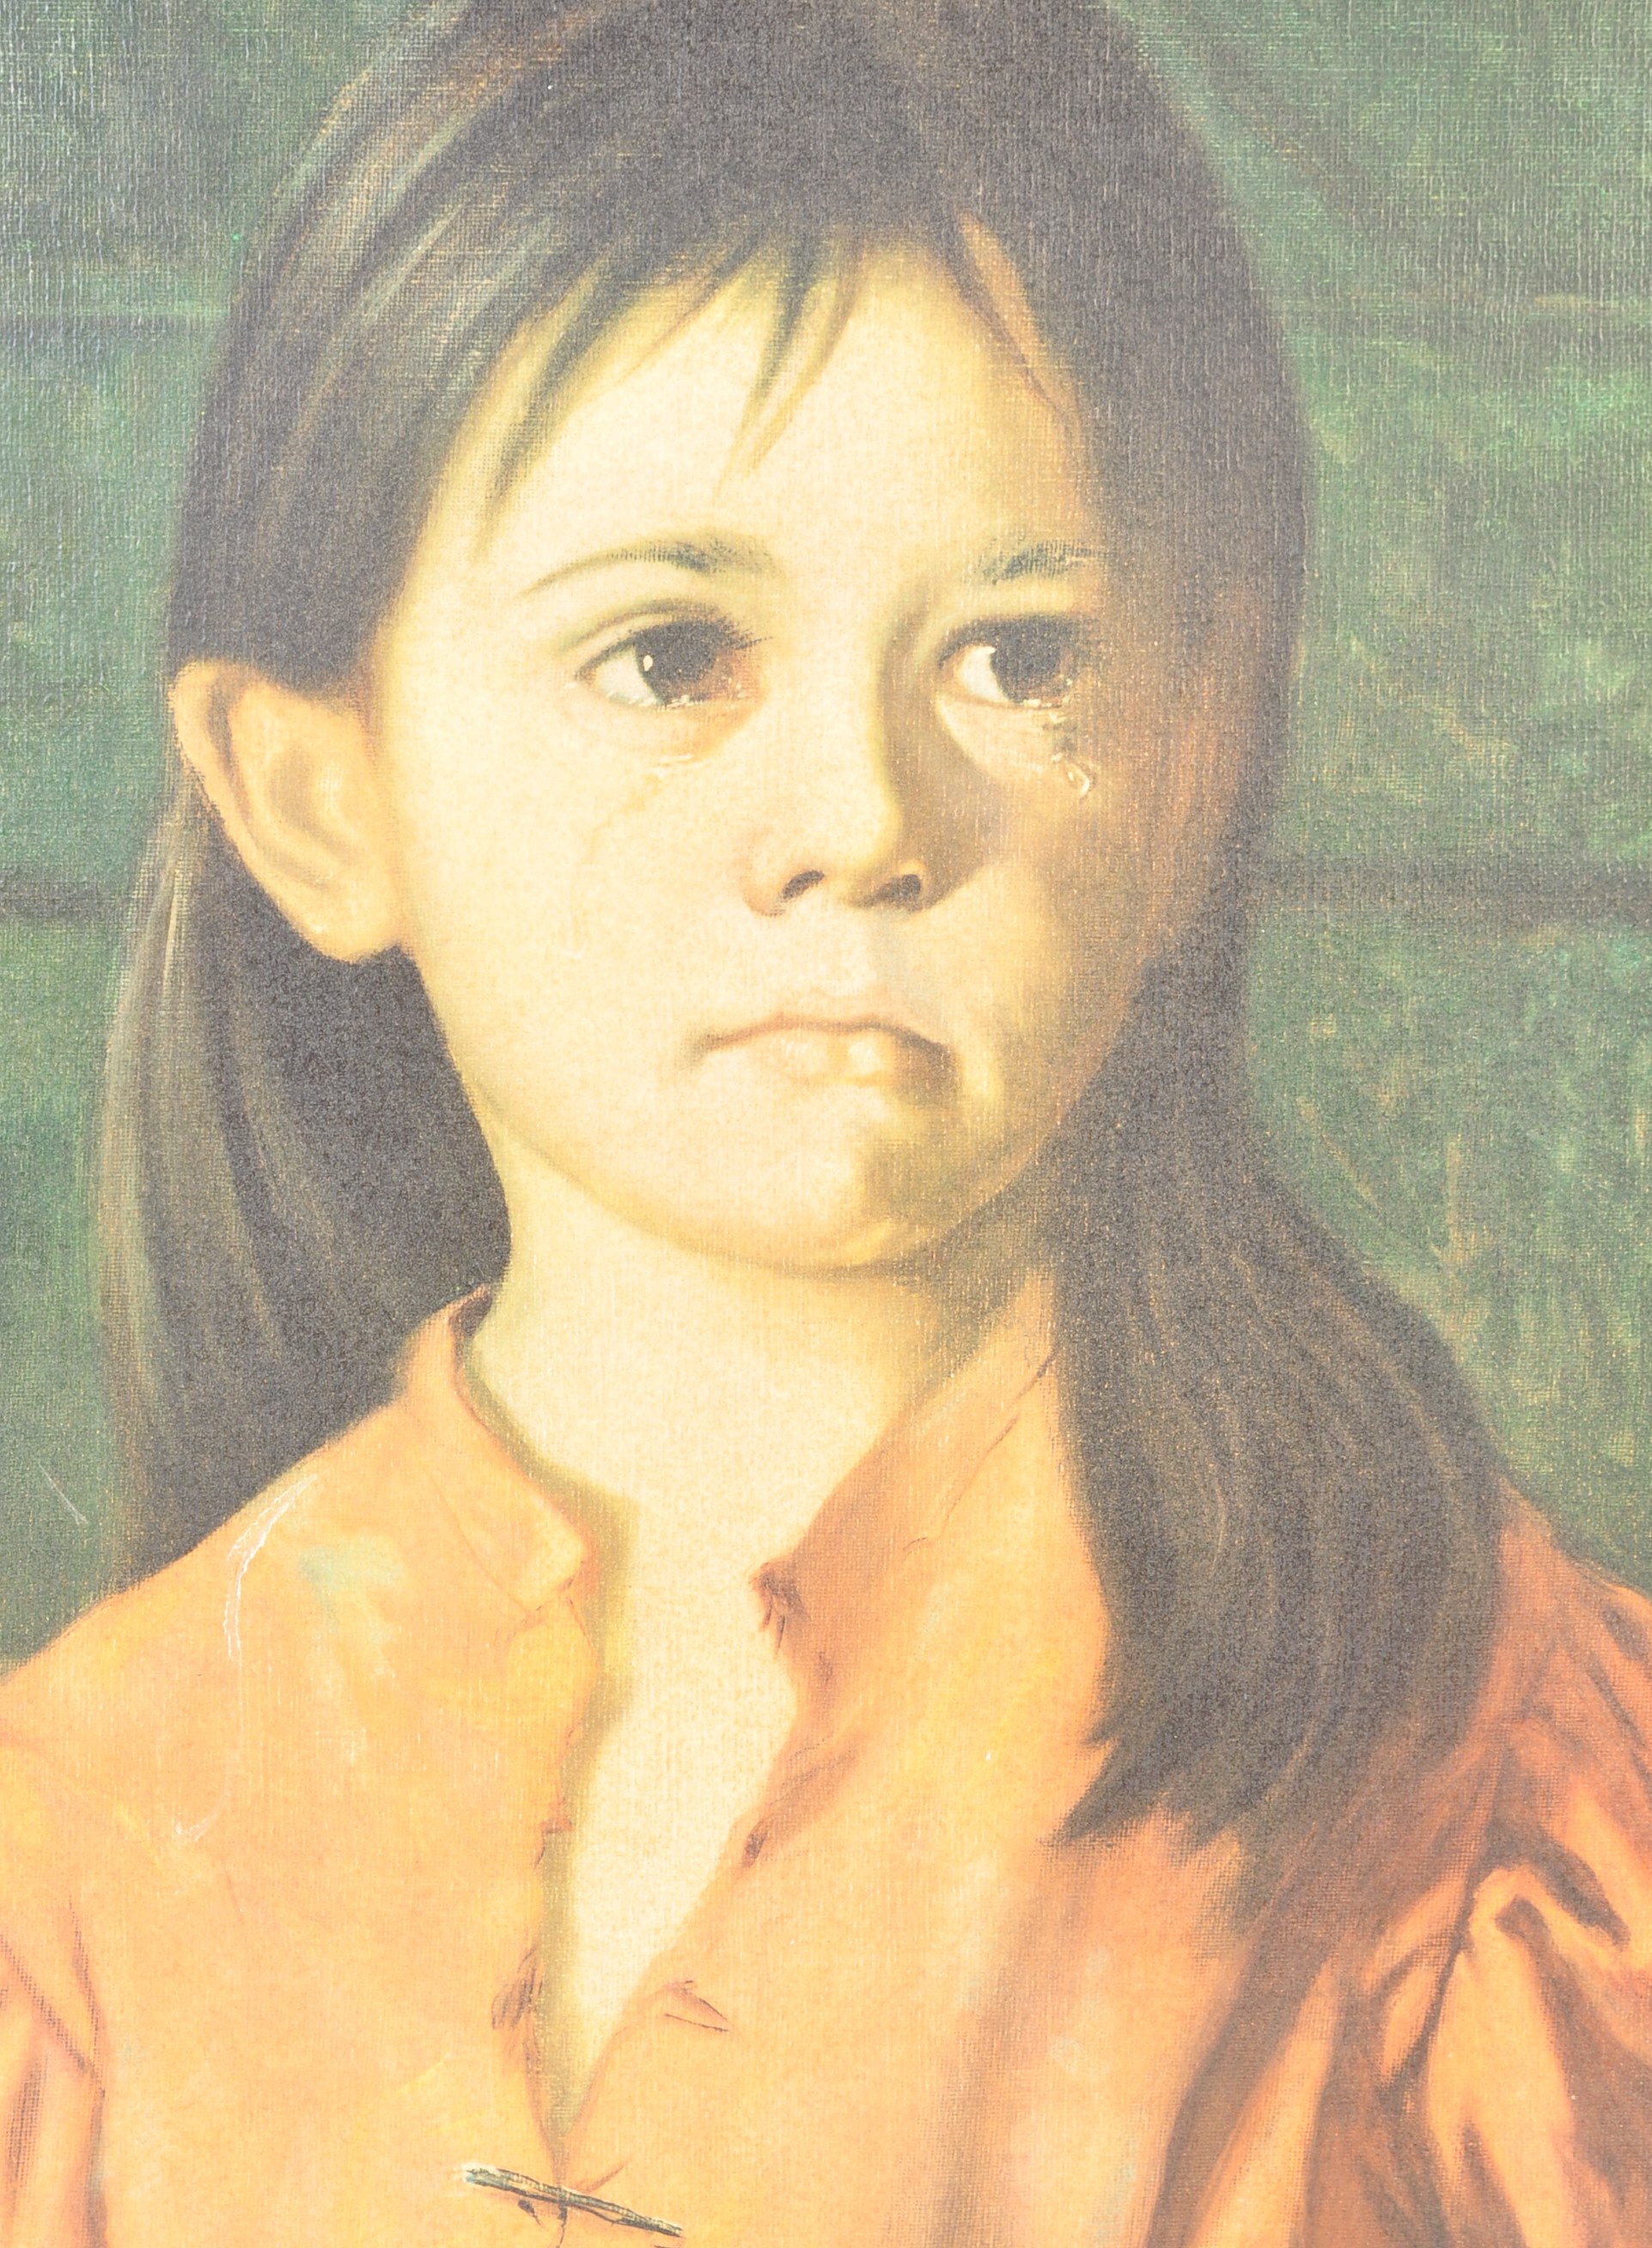 AFTER GIOVANNI BRAGOLIN - VINTAGE 20TH CENTURY 1960S BOOTS PRINT OF A YOUNG GIRL CRYING - Image 4 of 7